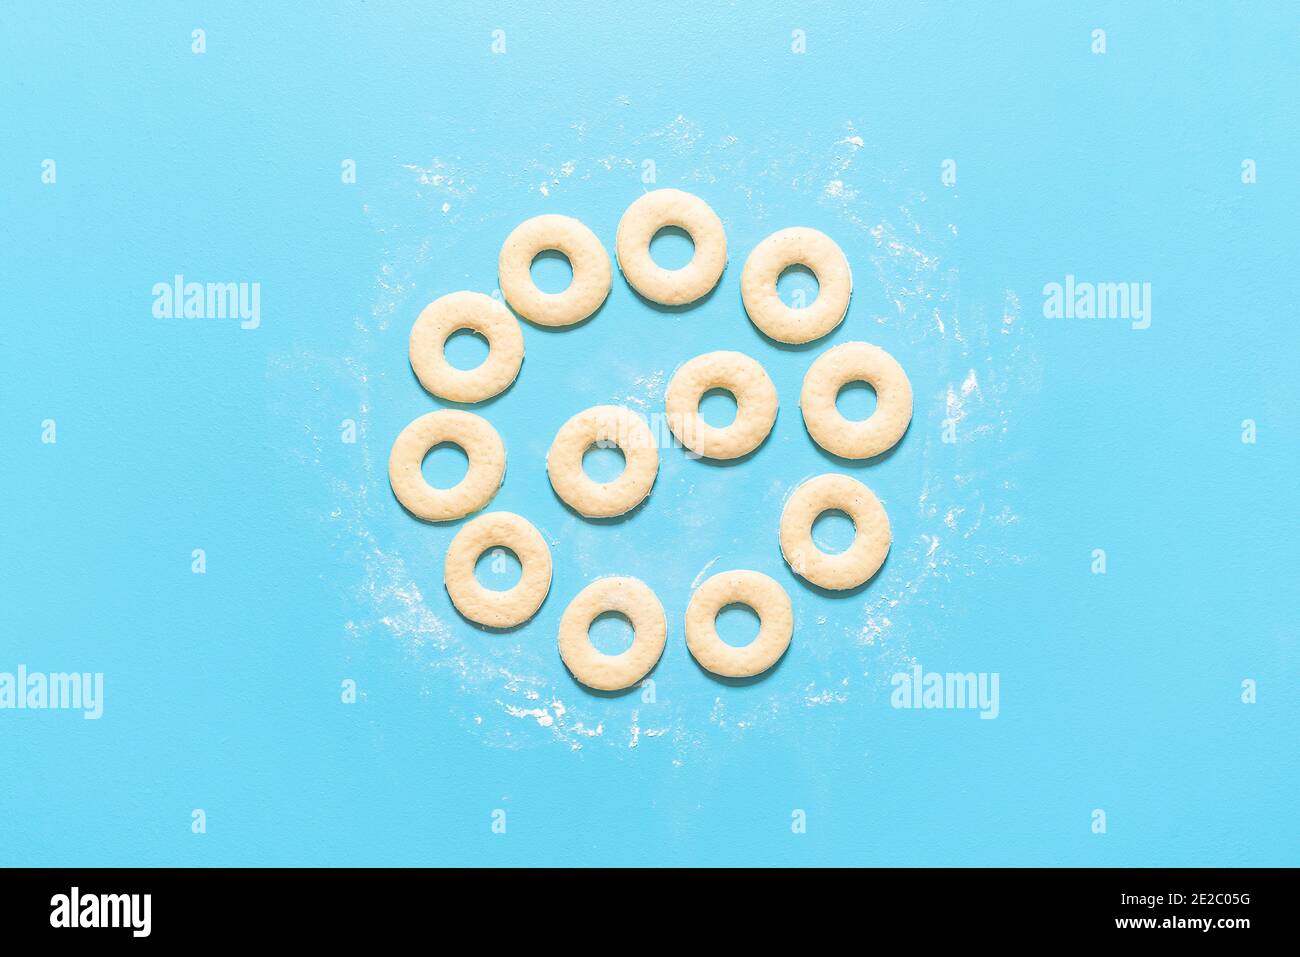 Raw donut dough cut in ring shapes, on blue background. Cooking doughnuts recipe. Homemade yeast raised donuts. Uncooked sweet dough. American sweets. Stock Photo